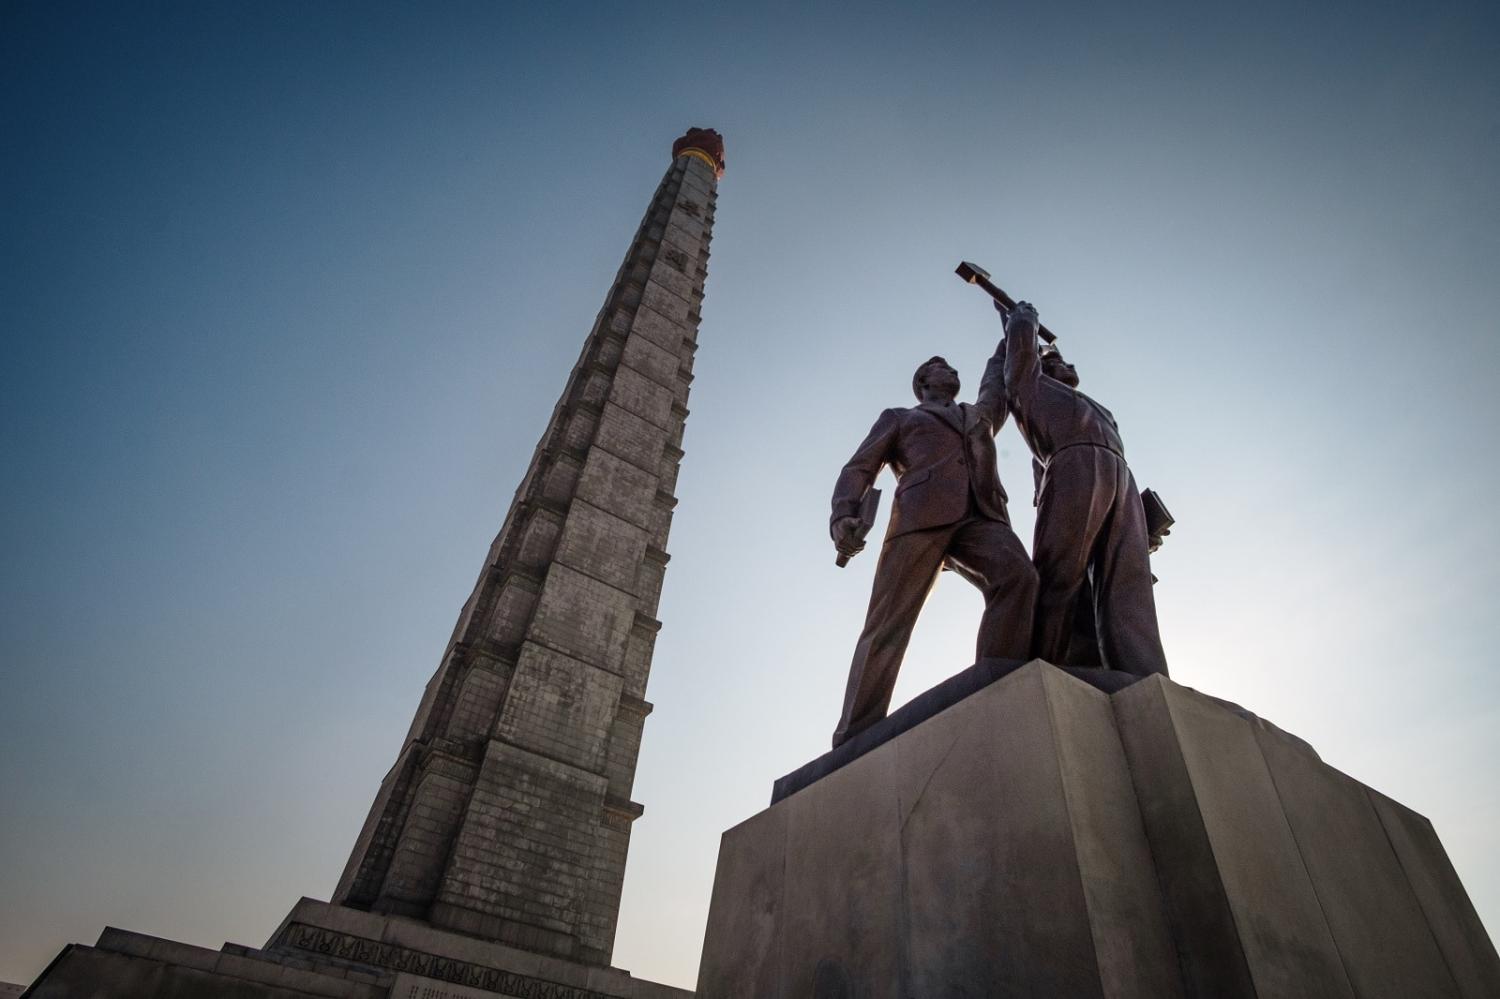 Juche Tower and the Workers’ Party of Korea monument in Pyongyang, North Korea (Getty Images)